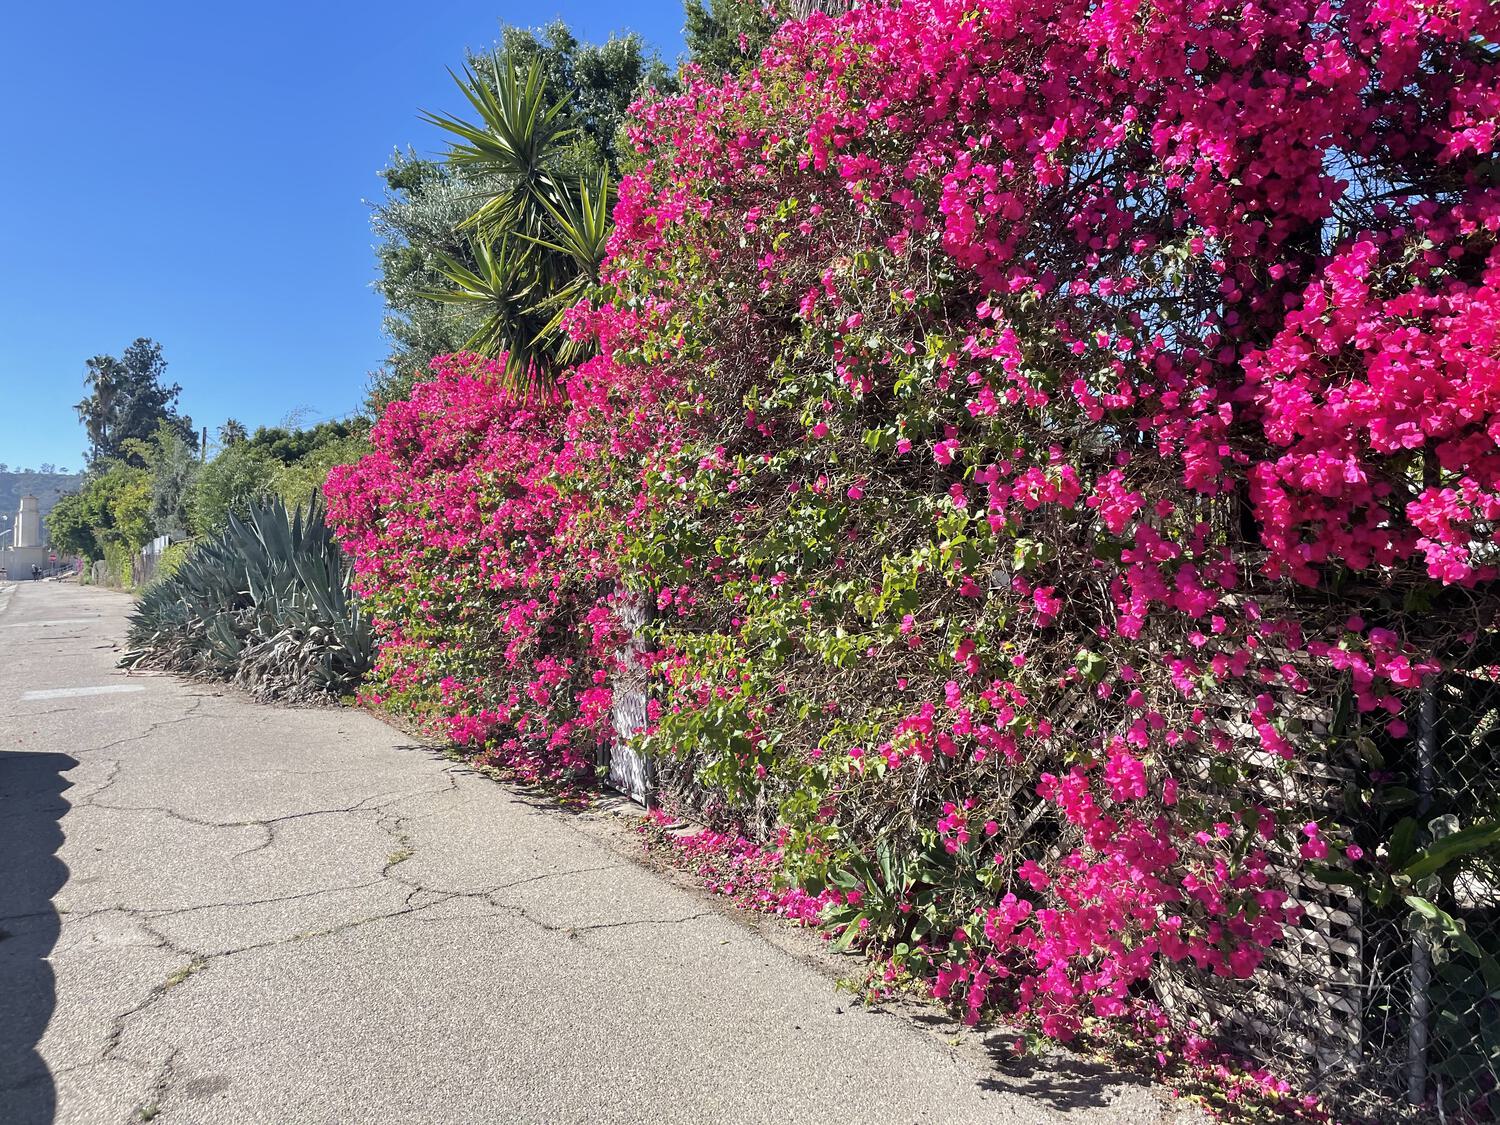 Bougainvillea creeping up a fence along the walkway of the LA River